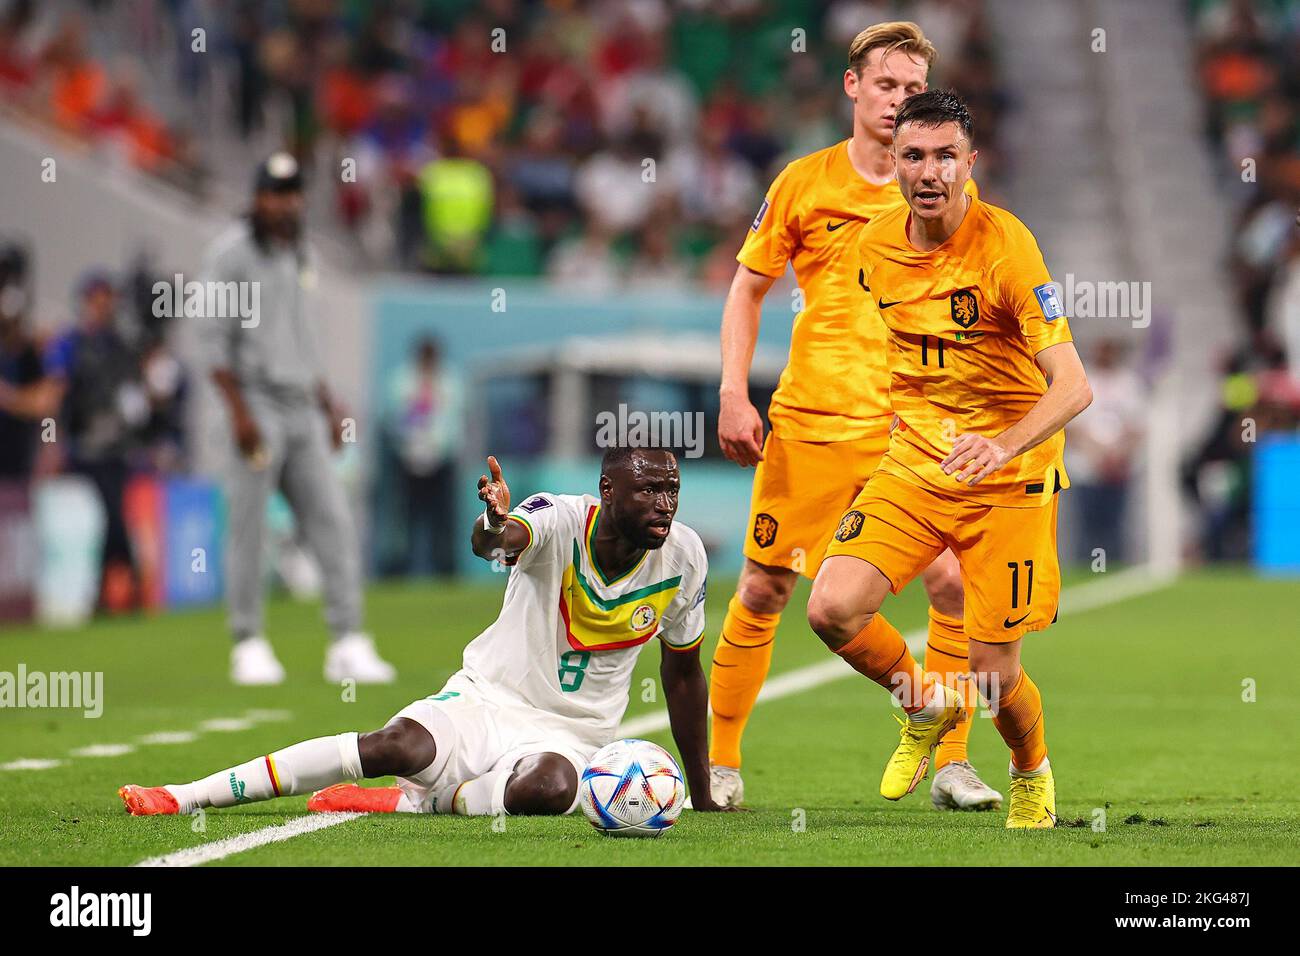 Doha, Qatar. 21st Nov, 2022. Cheikhou Kouyate (L) of Senegal reacts during the Group A match between Senegal and the Netherlands at the 2022 FIFA World Cup at Al Thumama Stadium in Doha, Qatar, Nov. 21, 2022. Credit: Ding Xu/Xinhua/Alamy Live News Stock Photo